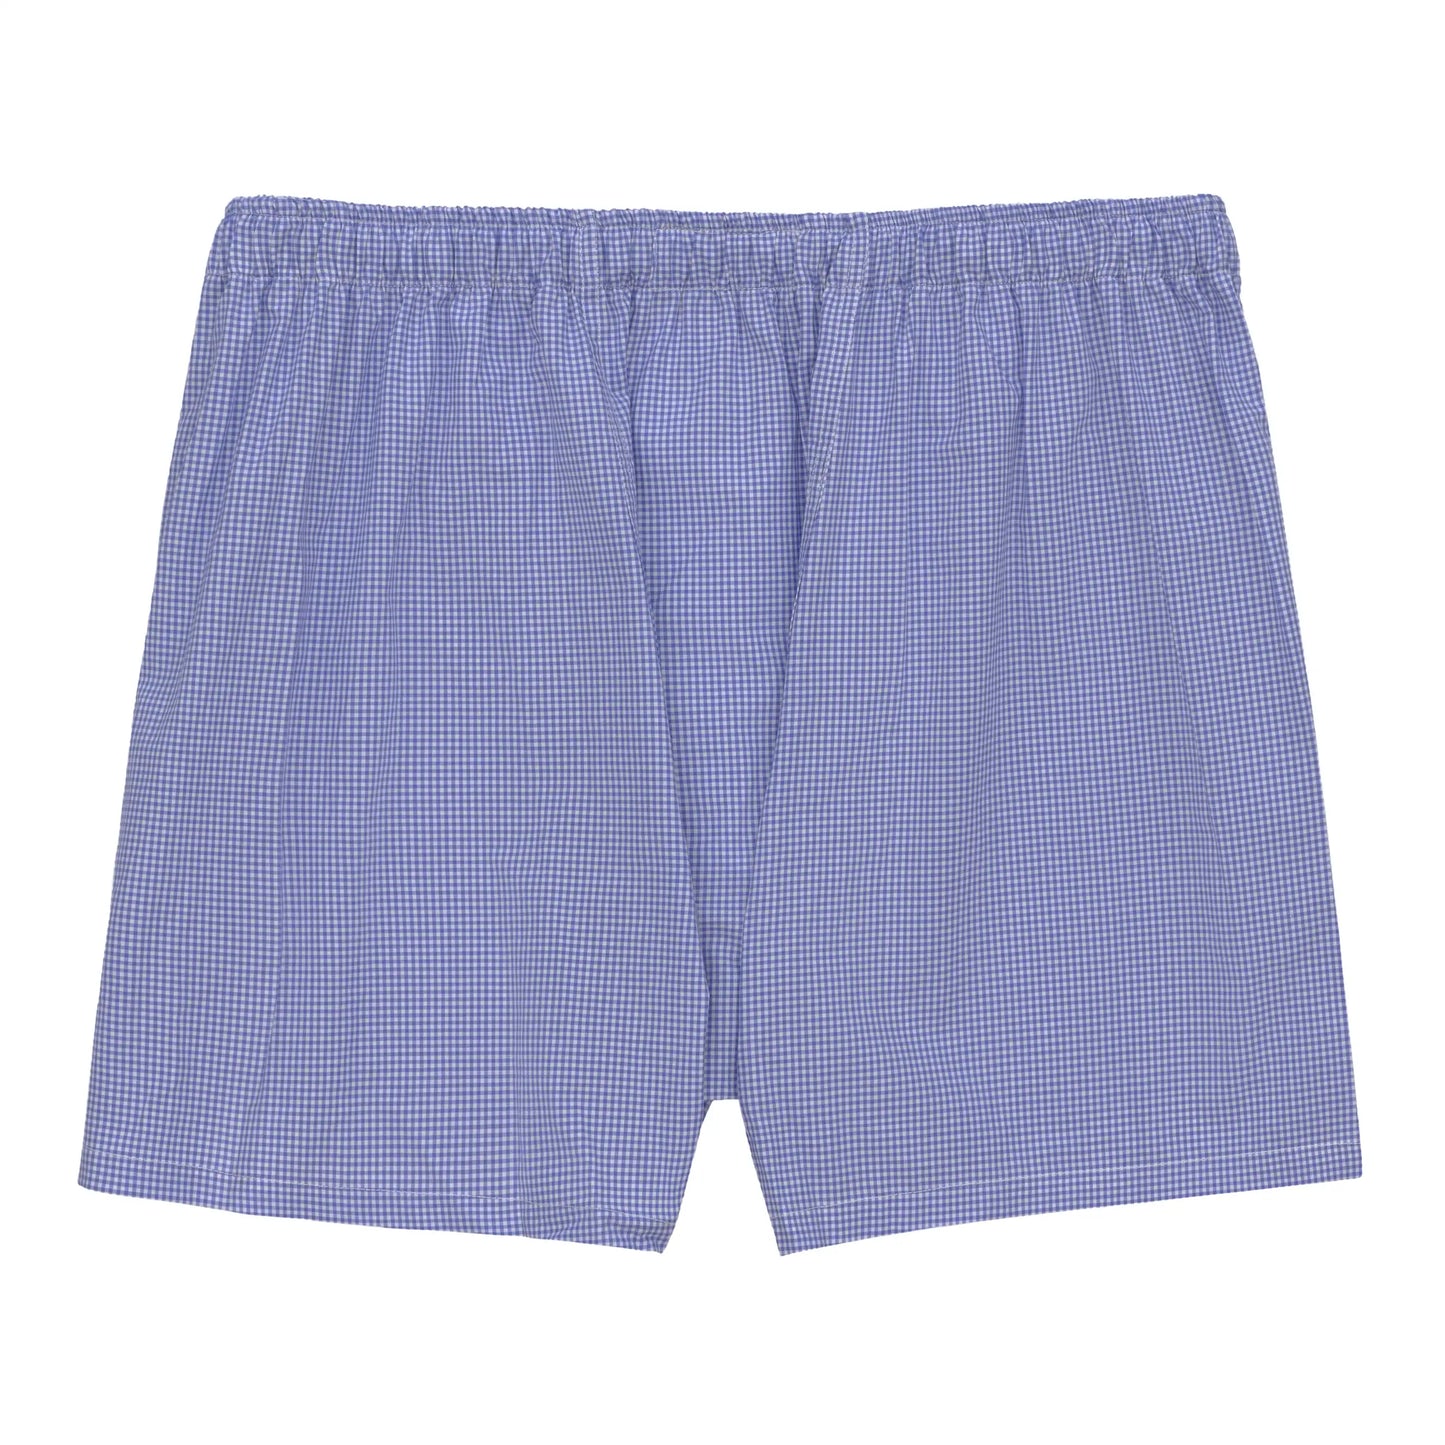 Checked Blue and White Boxer Shorts